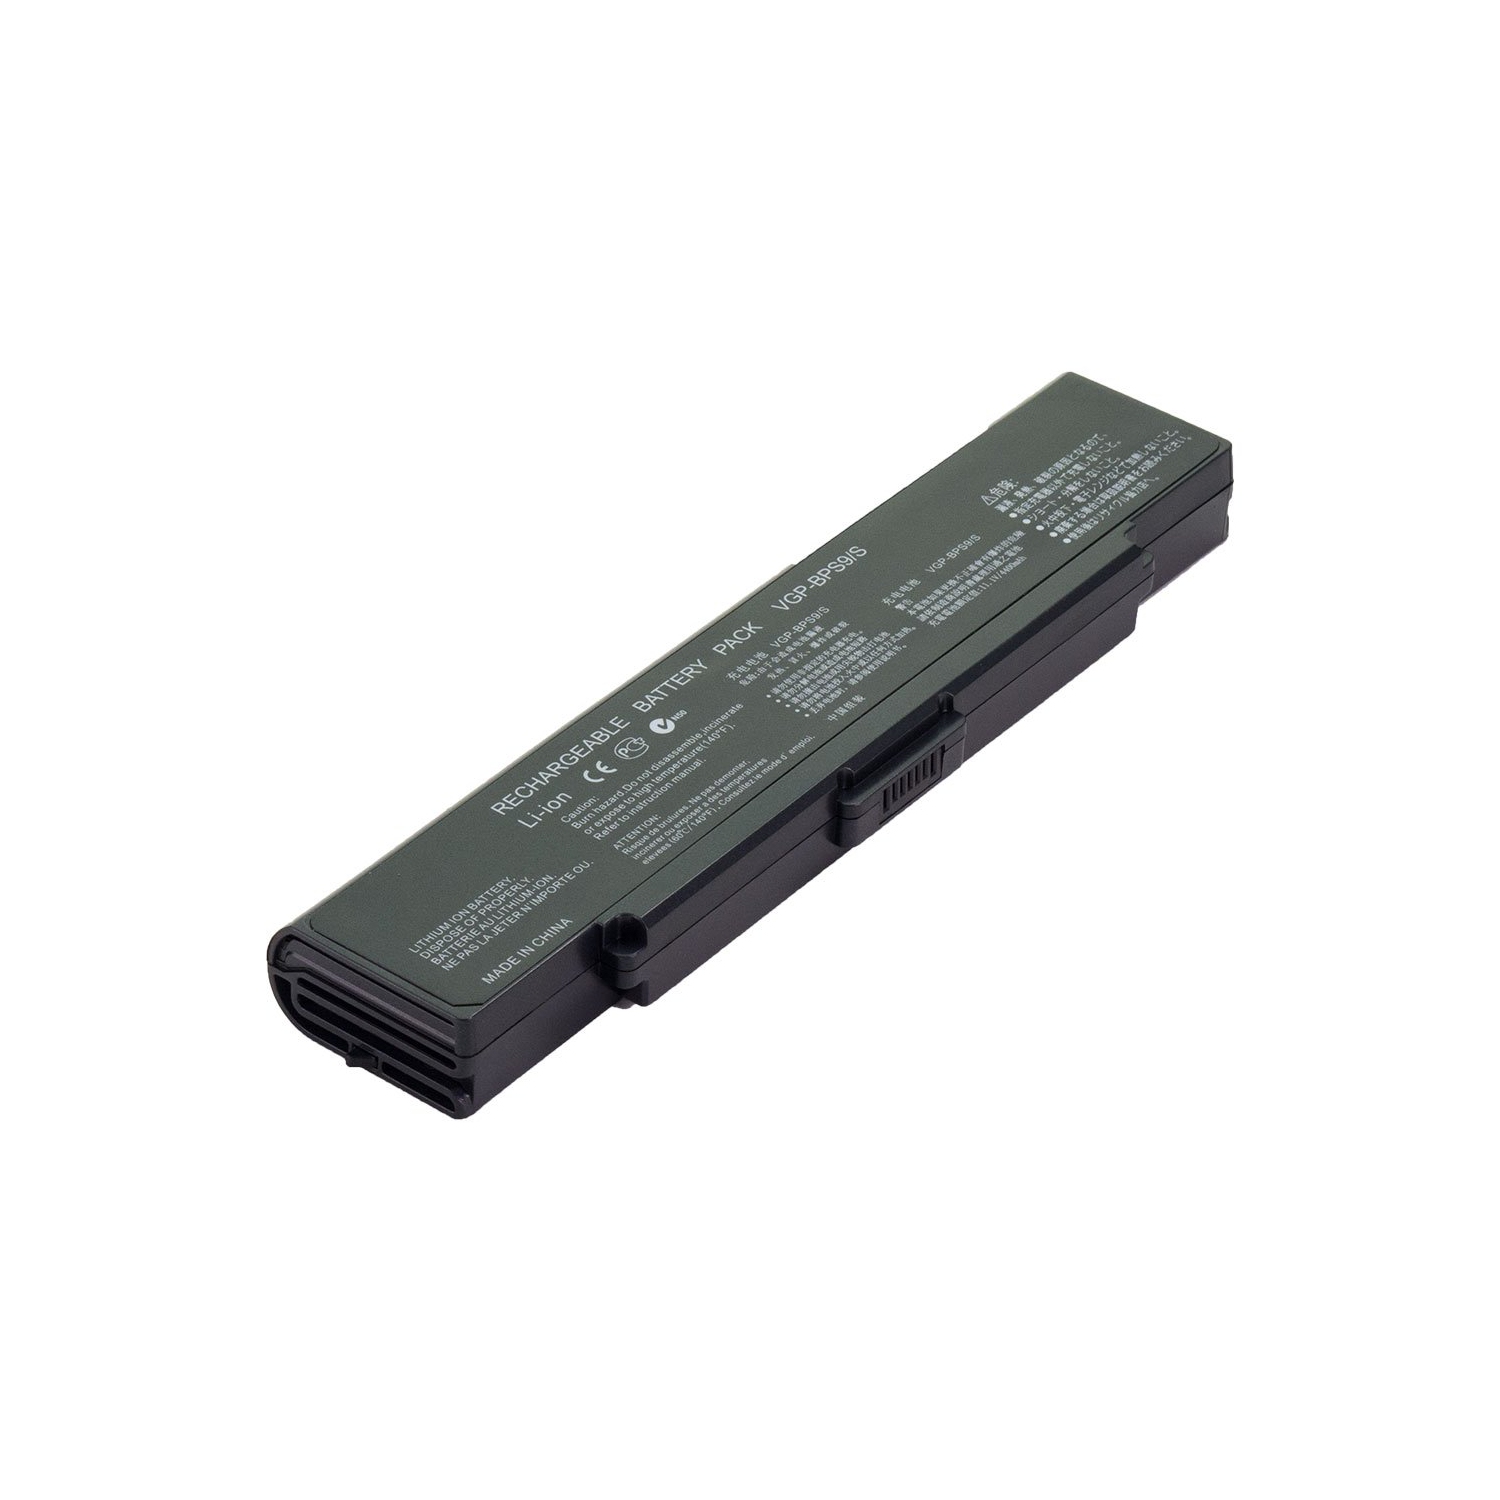 Laptop Battery Replacement for Sony VAIO VGN-CR120E/P, VGP-BPL9, VGP-BPS10/S, VGP-BPS10A/B, VGP-BPS9A, VGP-BPS9B